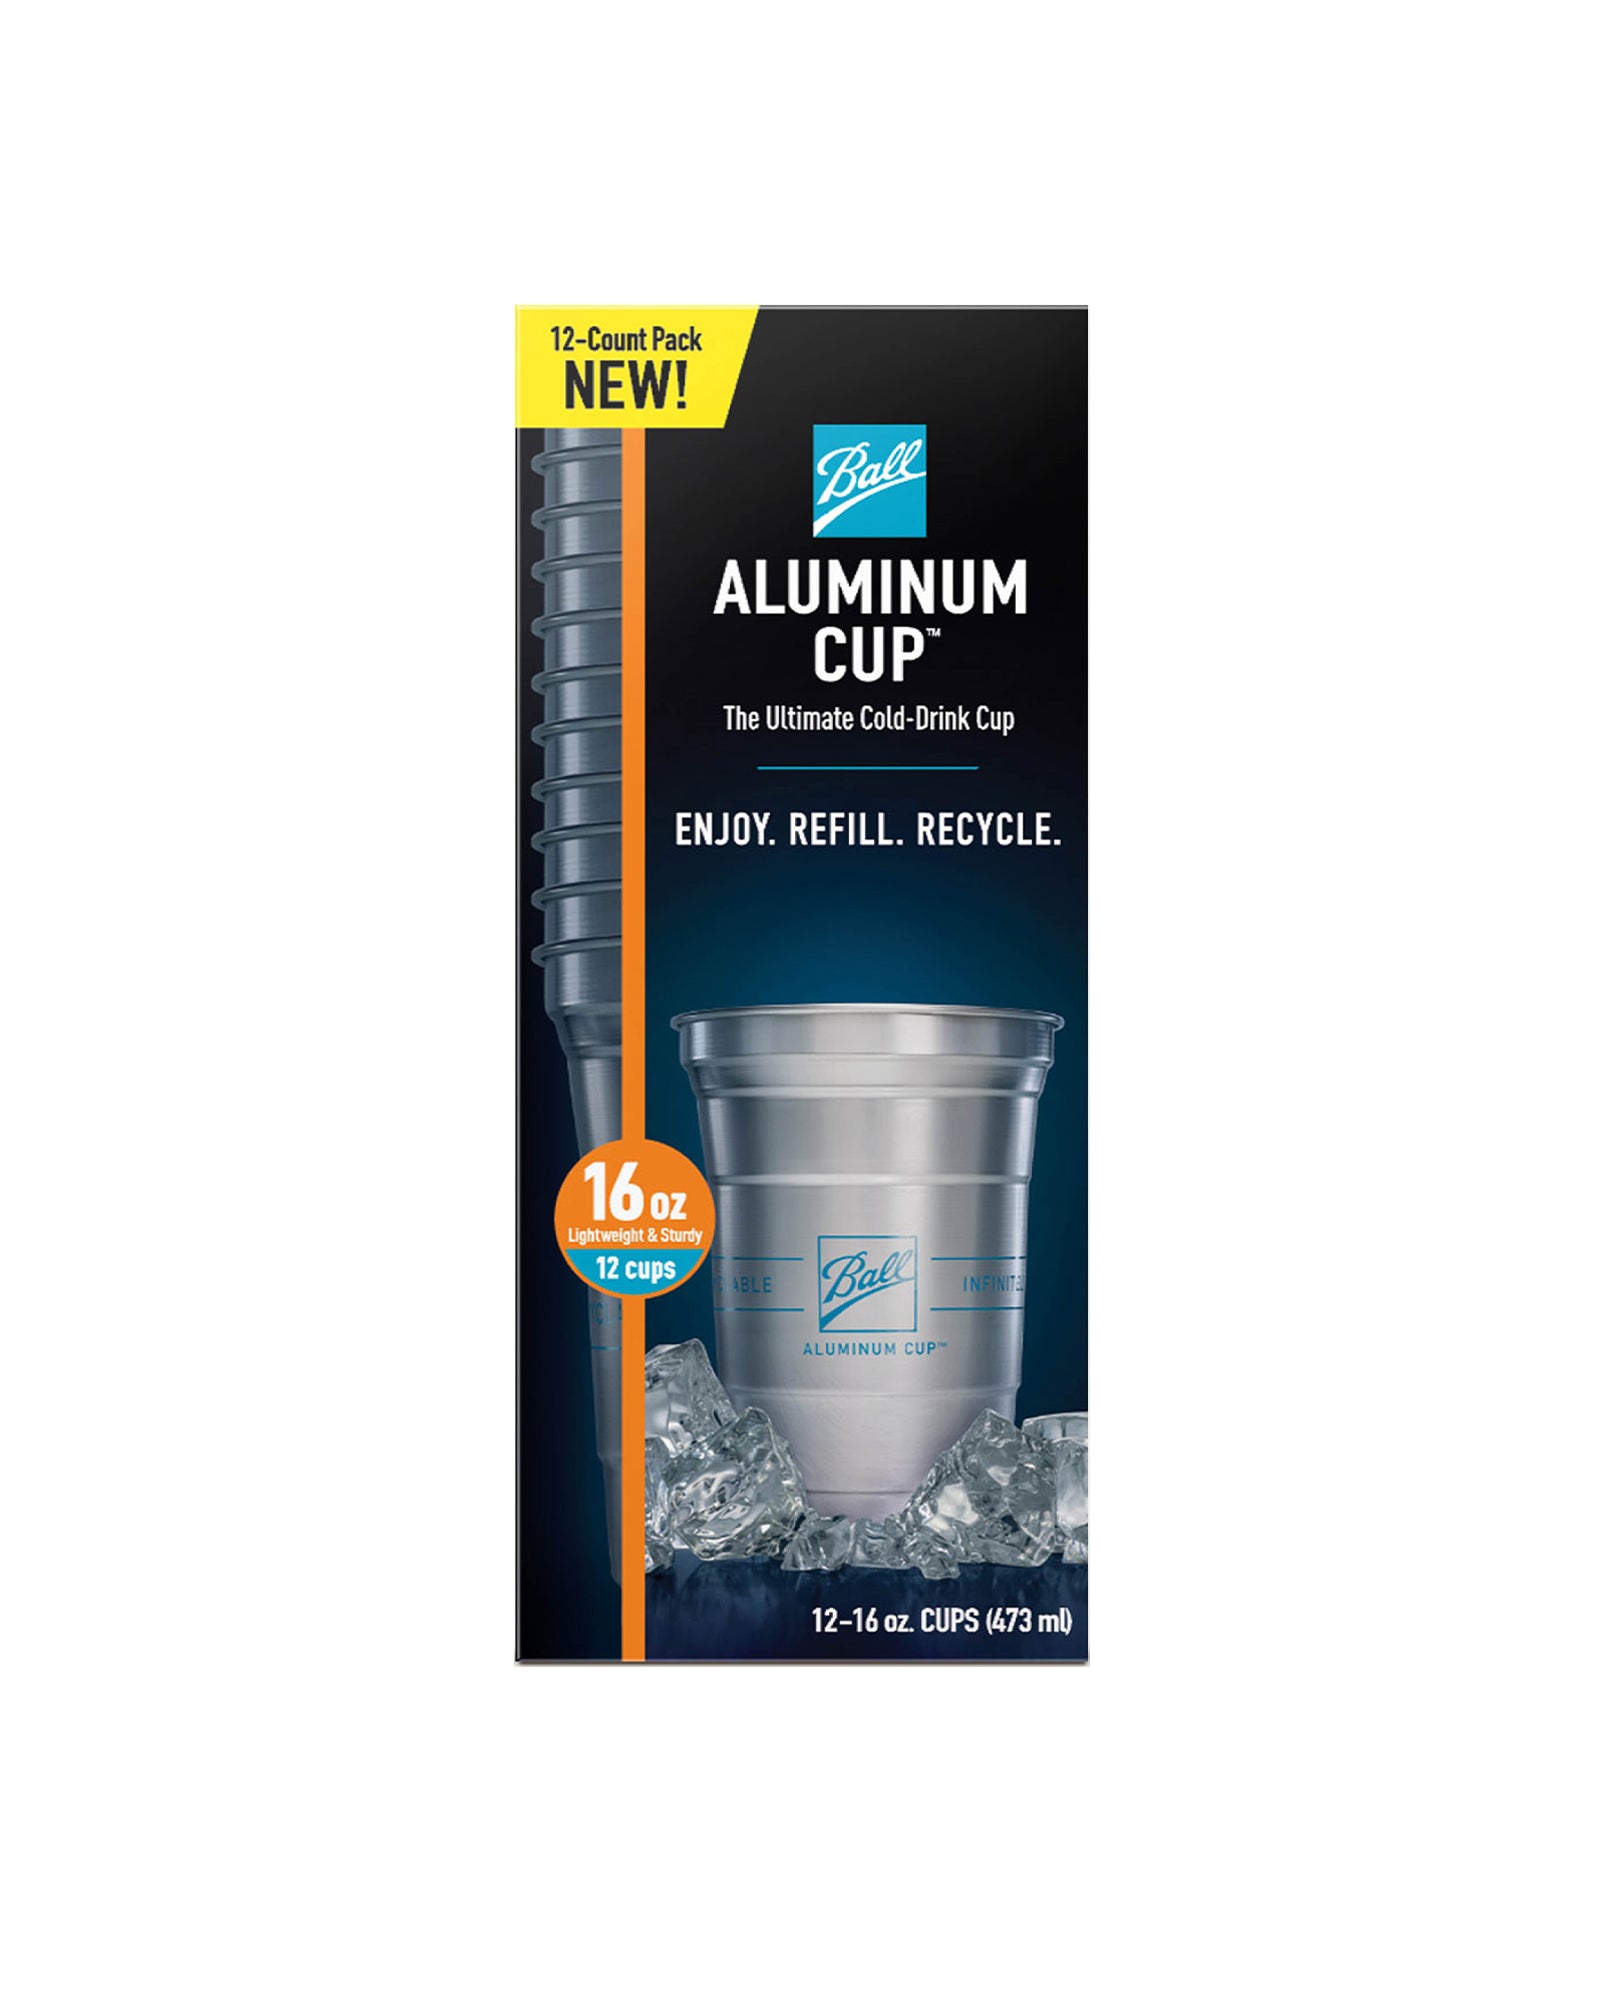  Ball Aluminum Cup Recyclable Party Cups, 12 oz. Cup